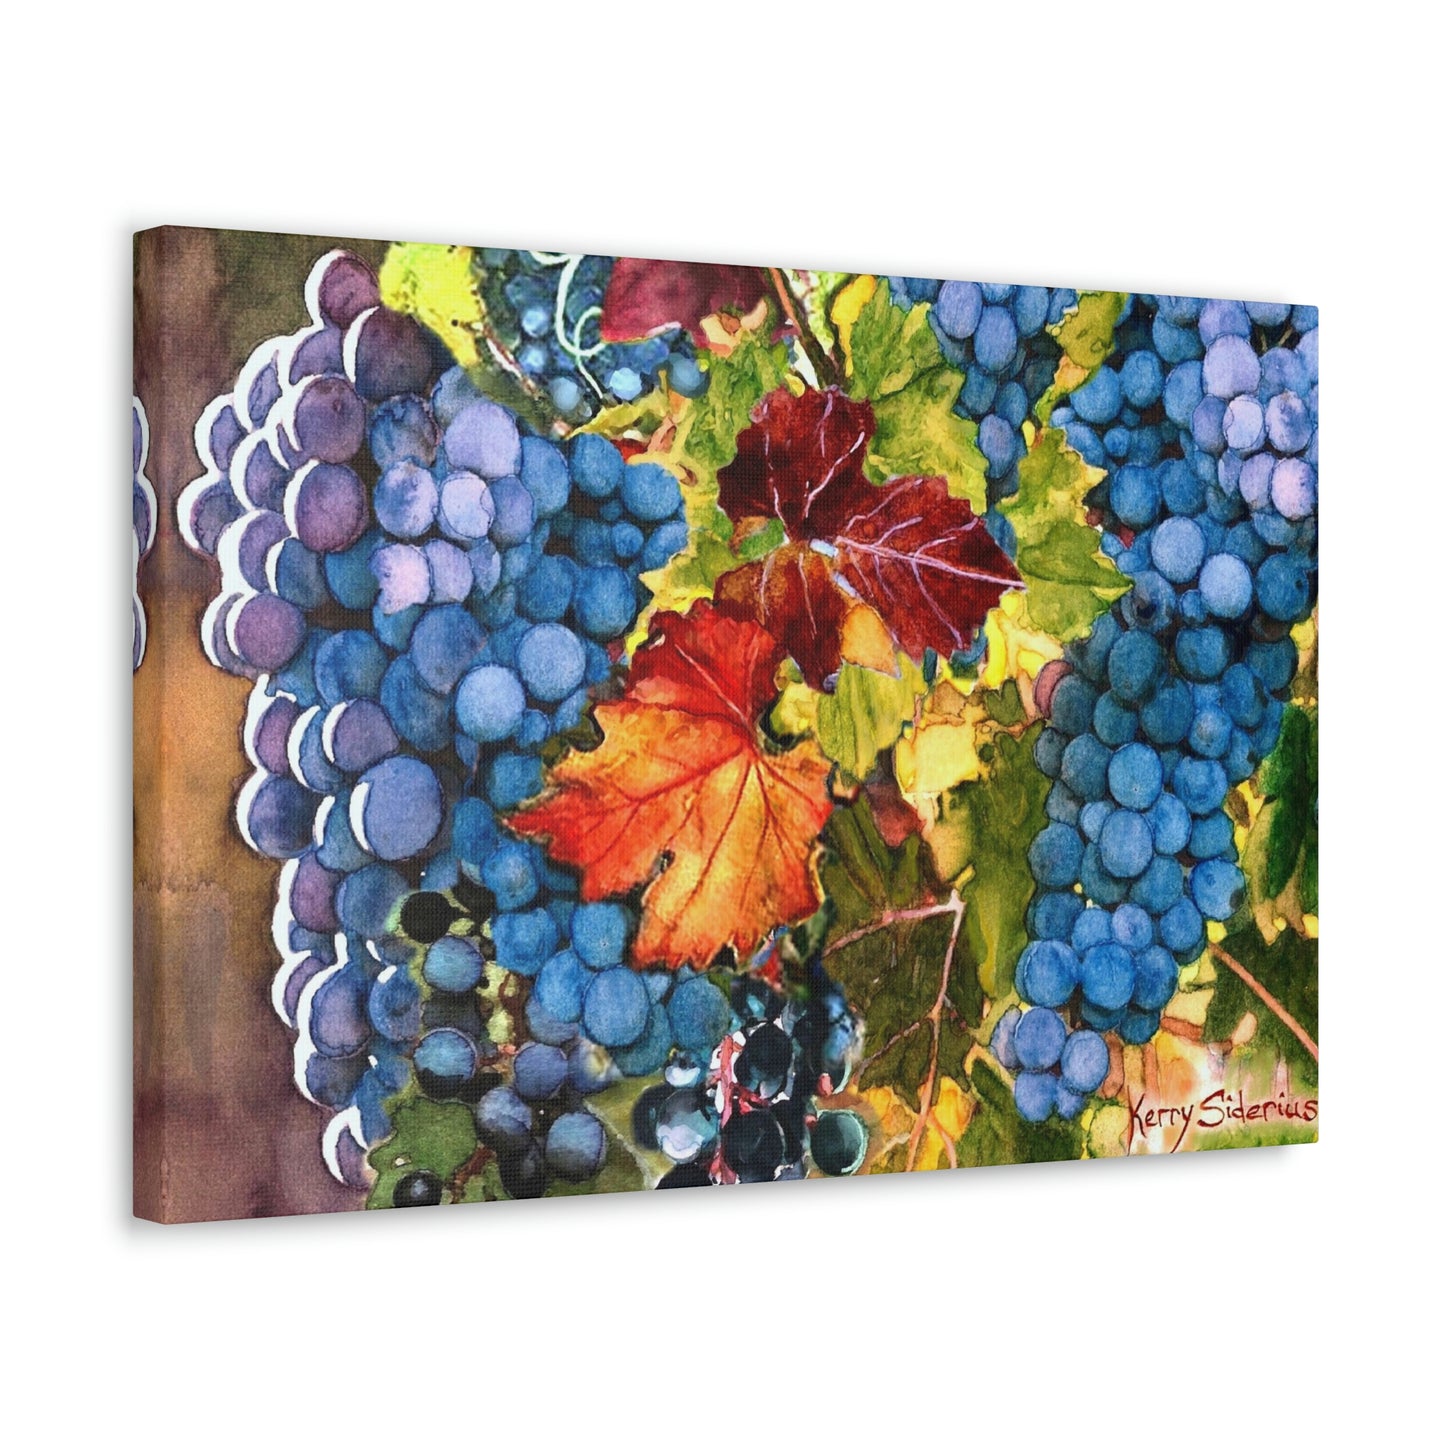 "Sunset on Syrah" Gallery Wrapped Canvas - Kerry Siderius Art 